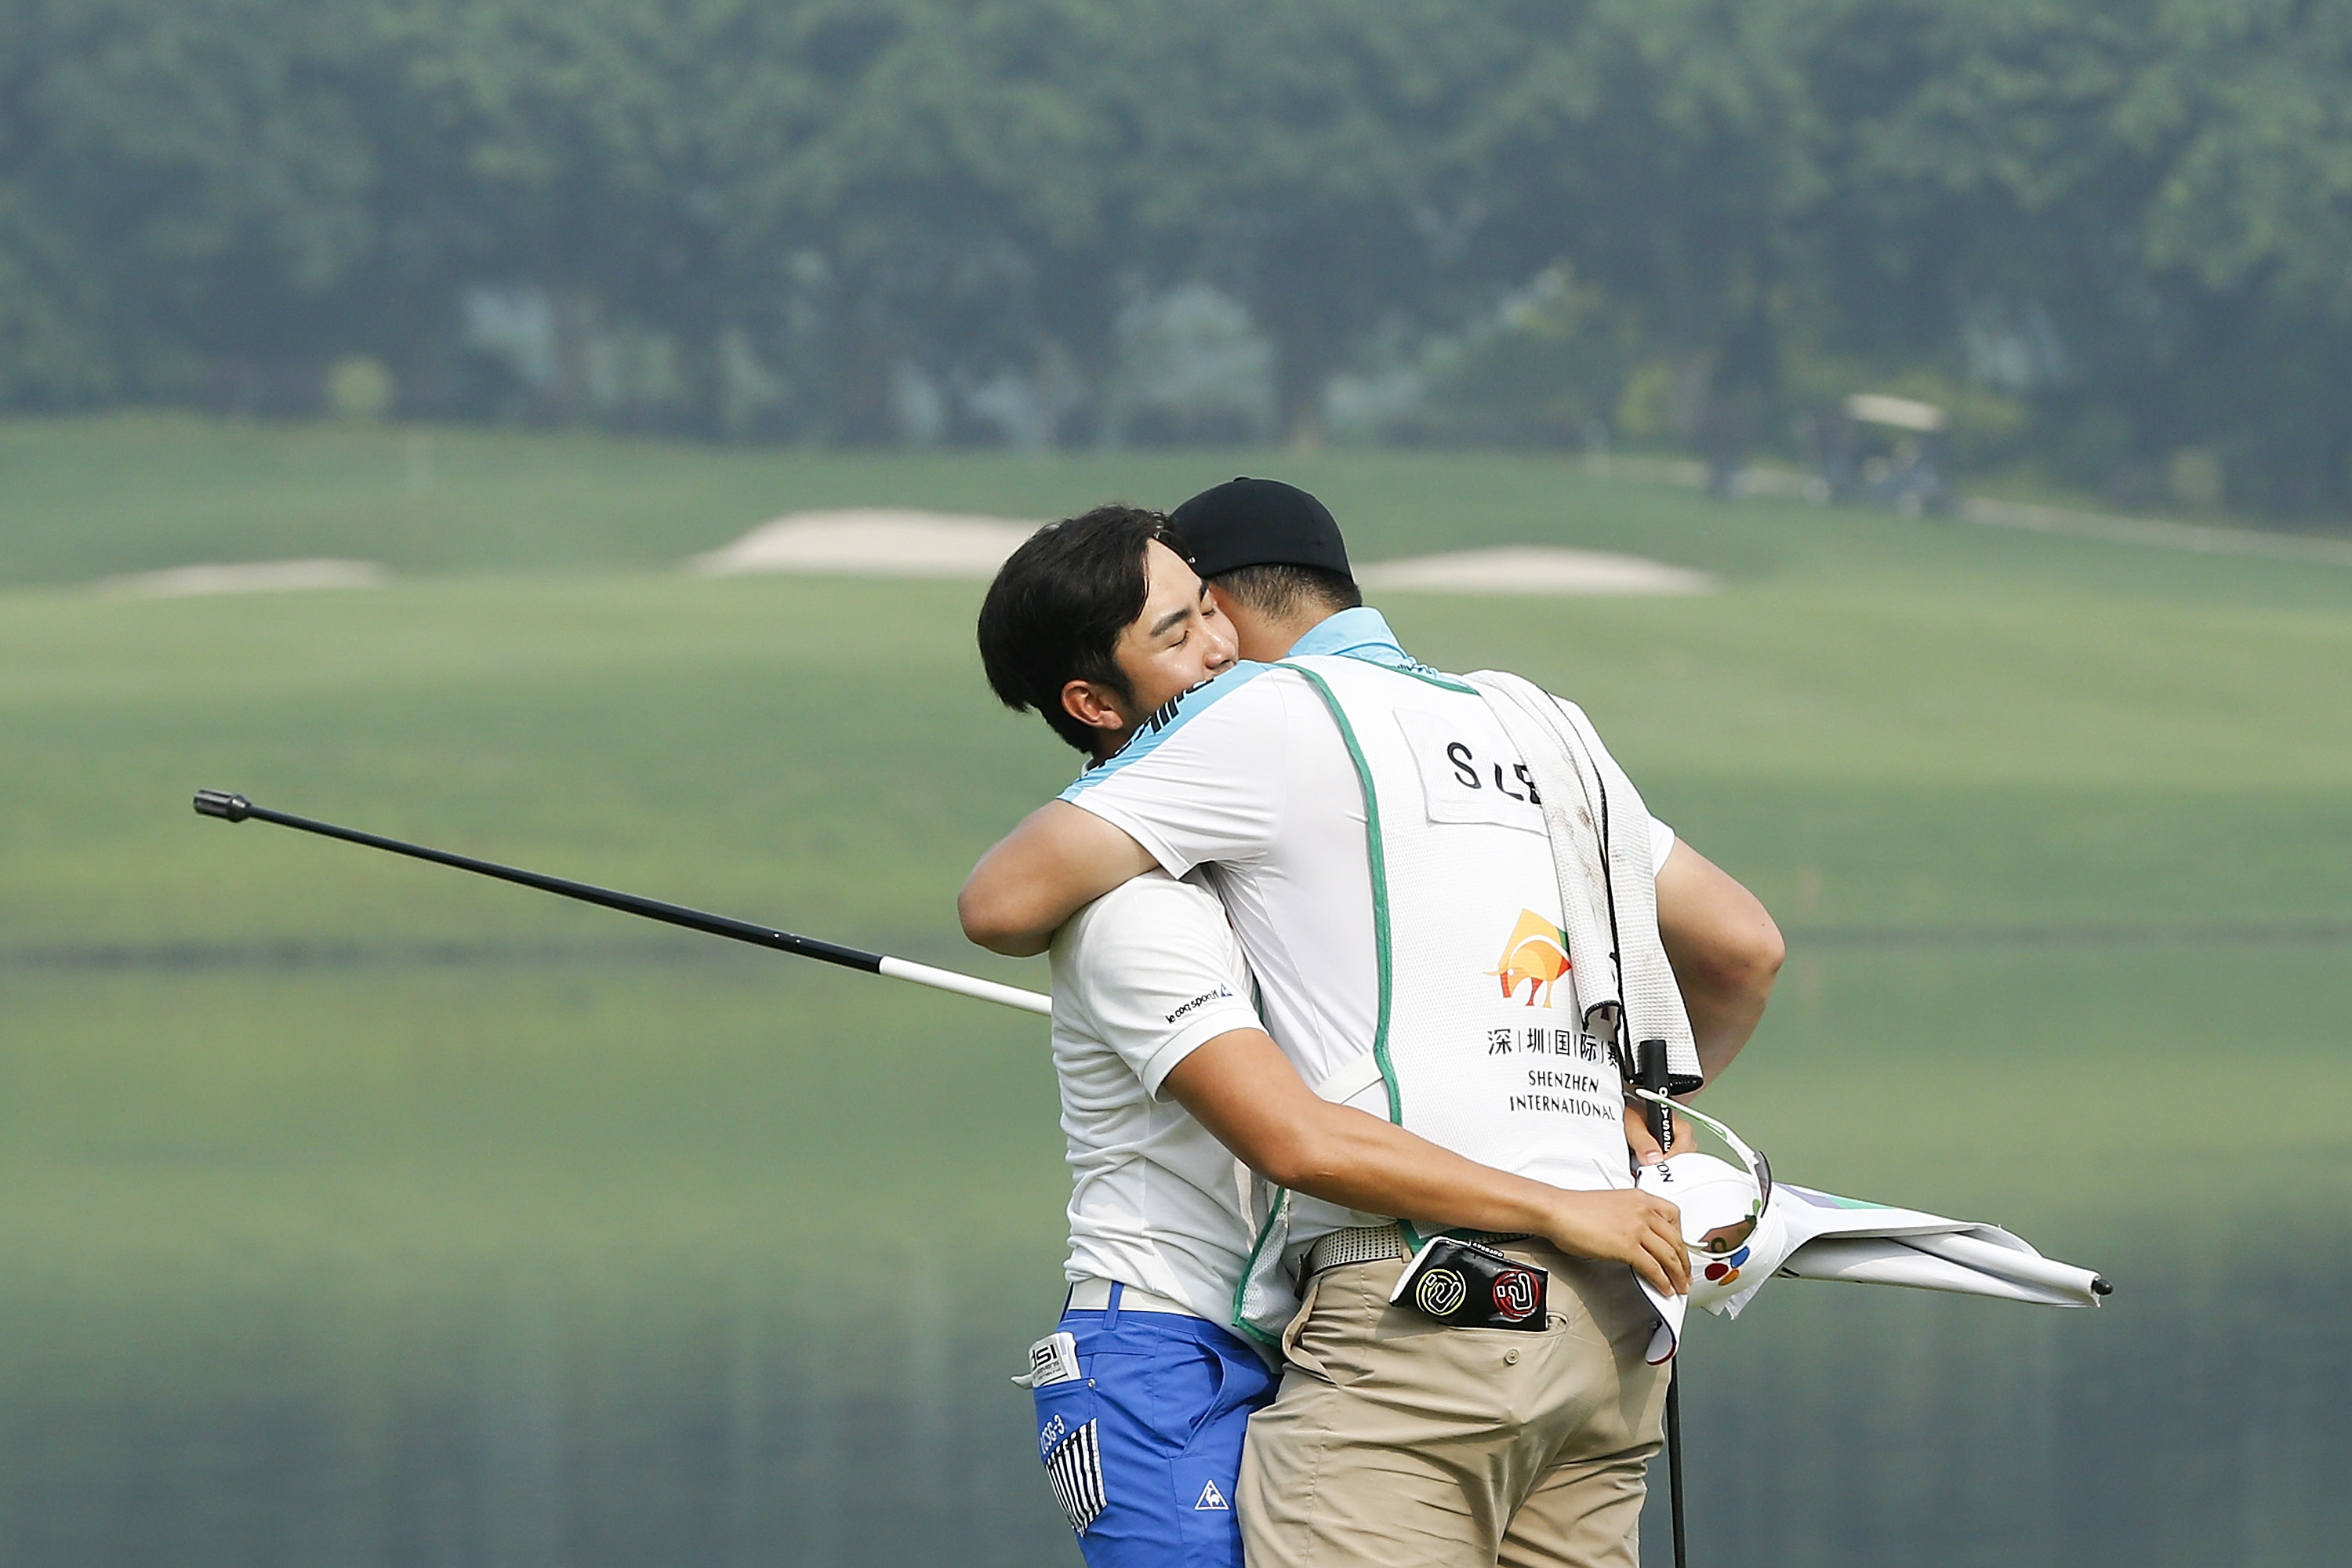 Soomin Lee of South Korea celebrates with his caddy.